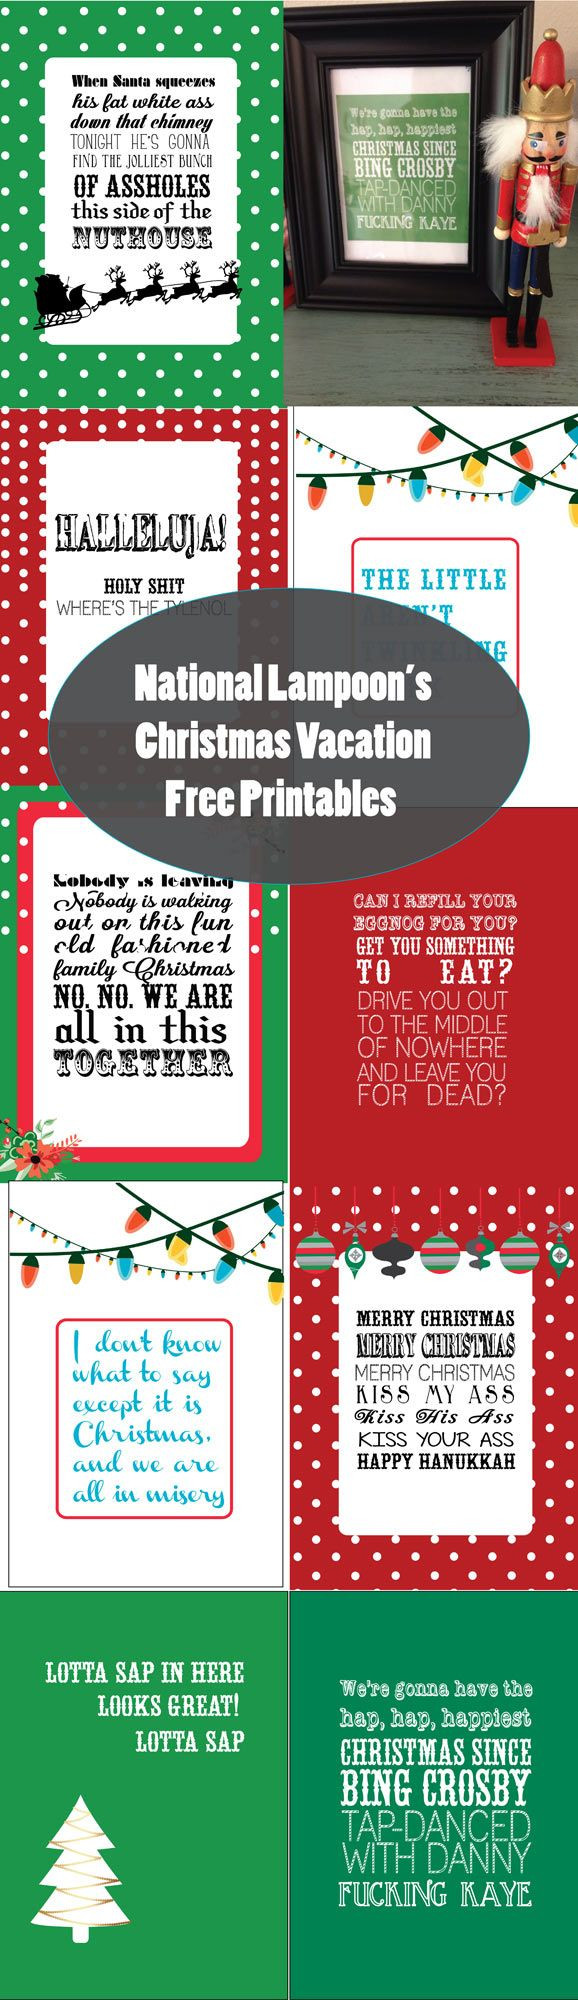 National.Lampoons Christmas Vacation Quotes
 National Lampoons Christmas Vacation Quotes QuotesGram